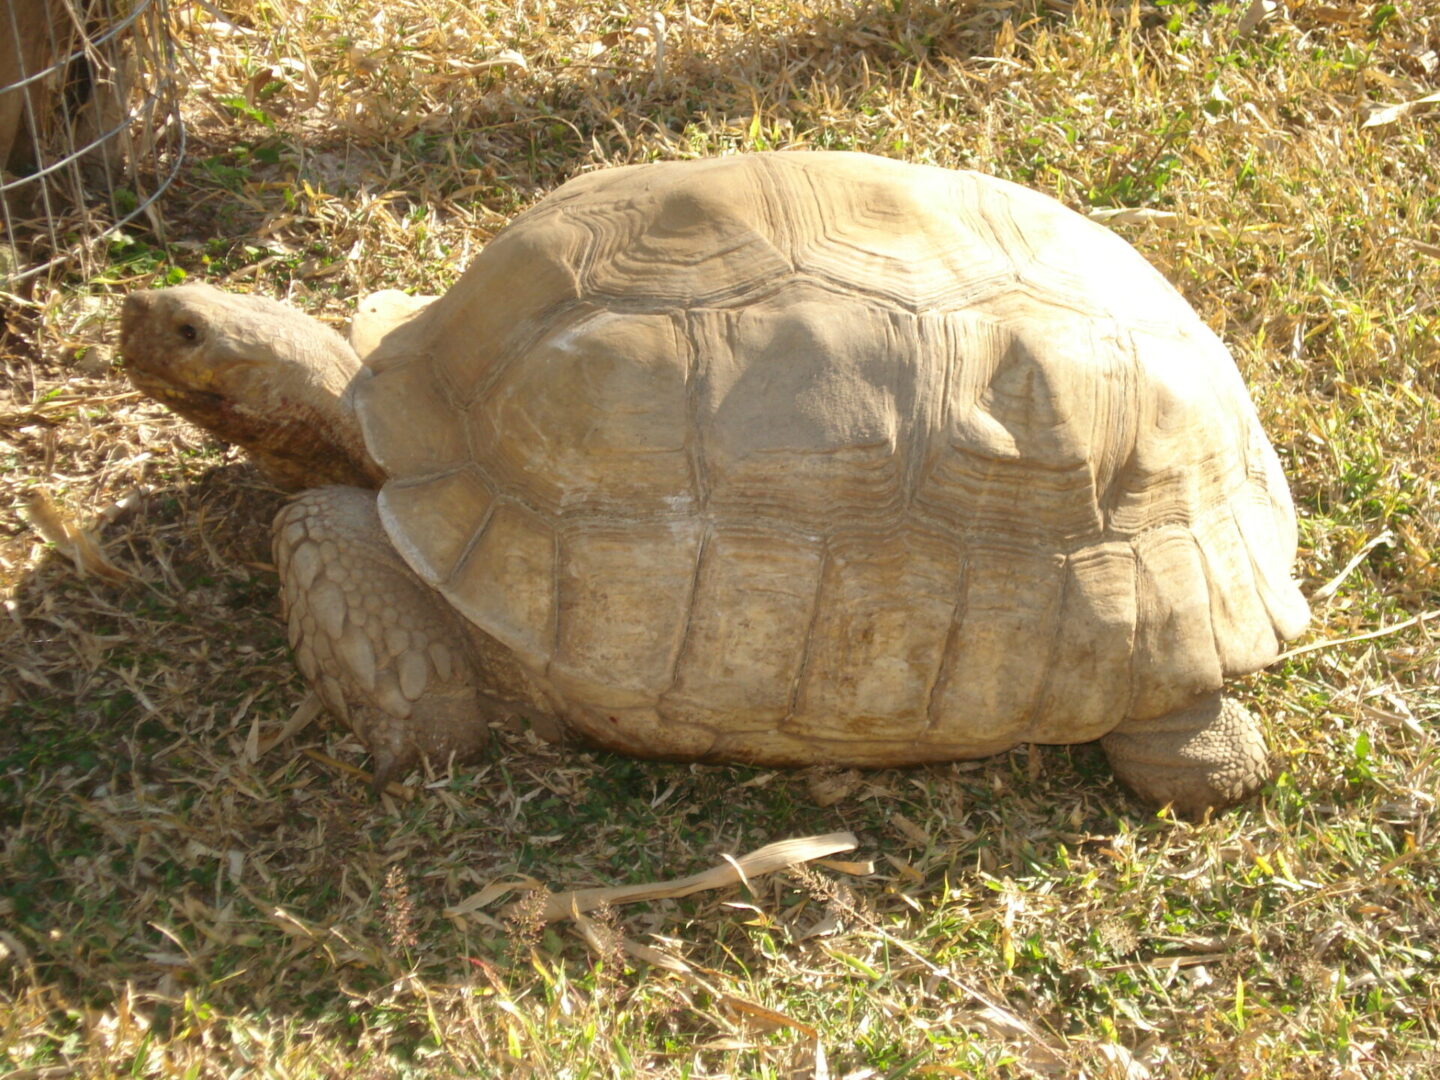 An old tortoise